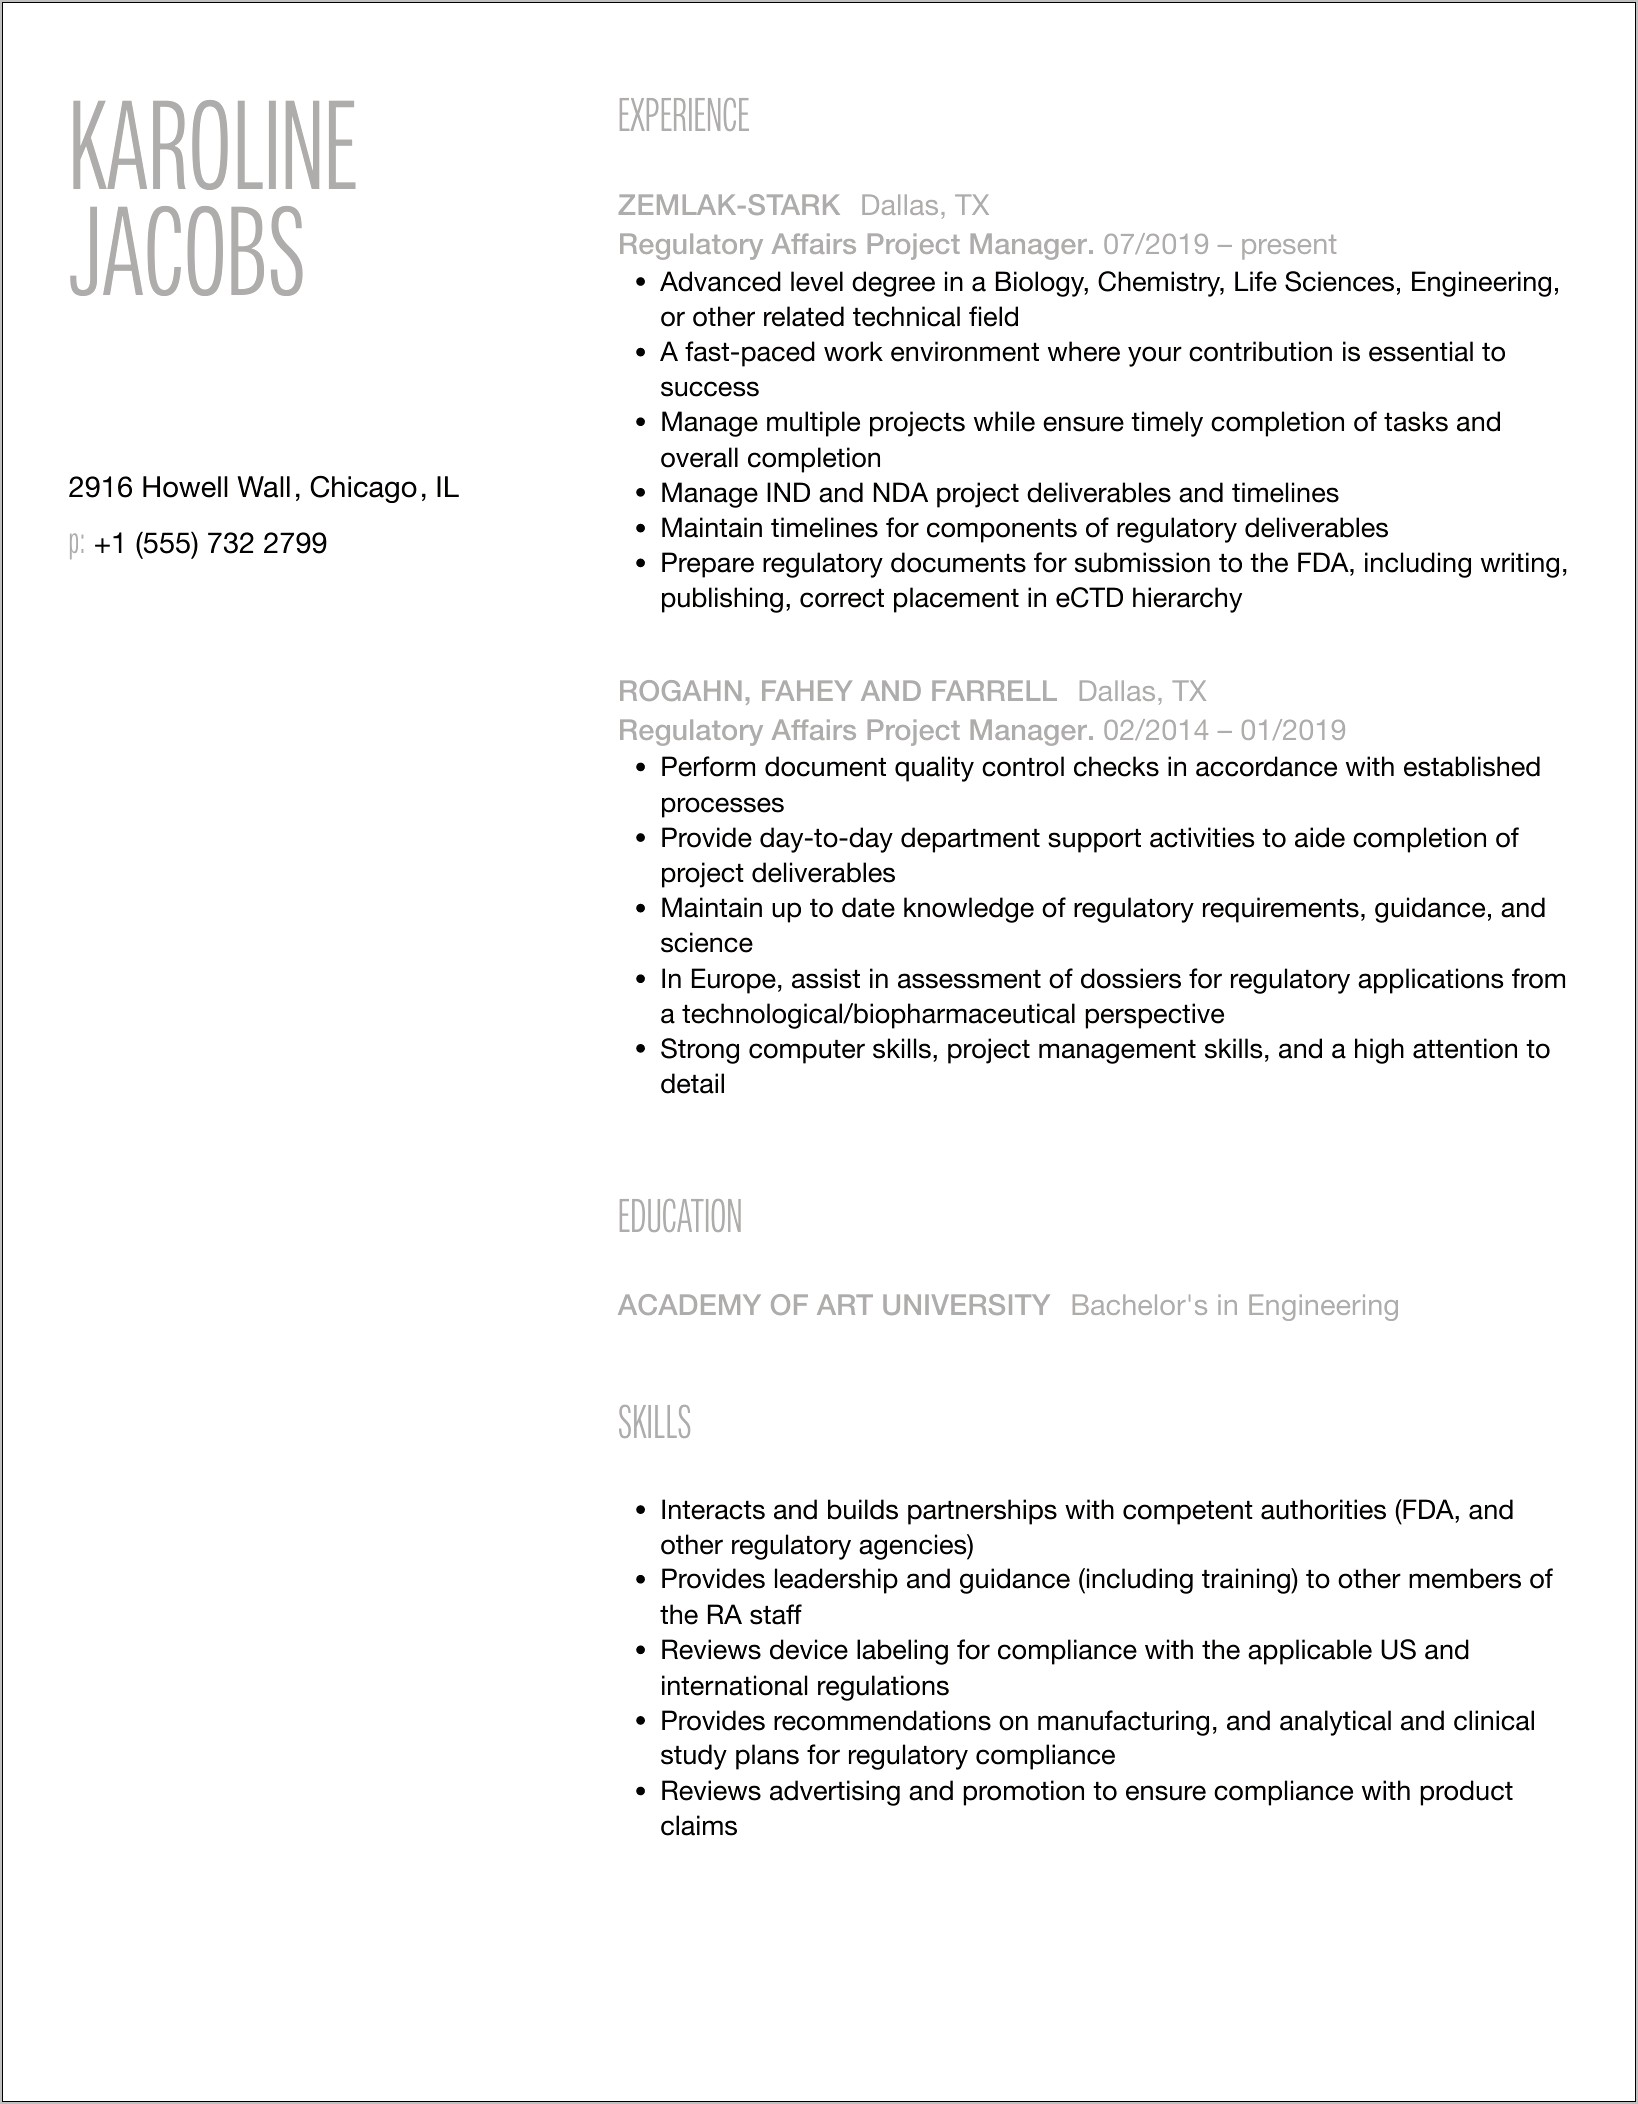 Regulatory Affairs Project Manager Resume